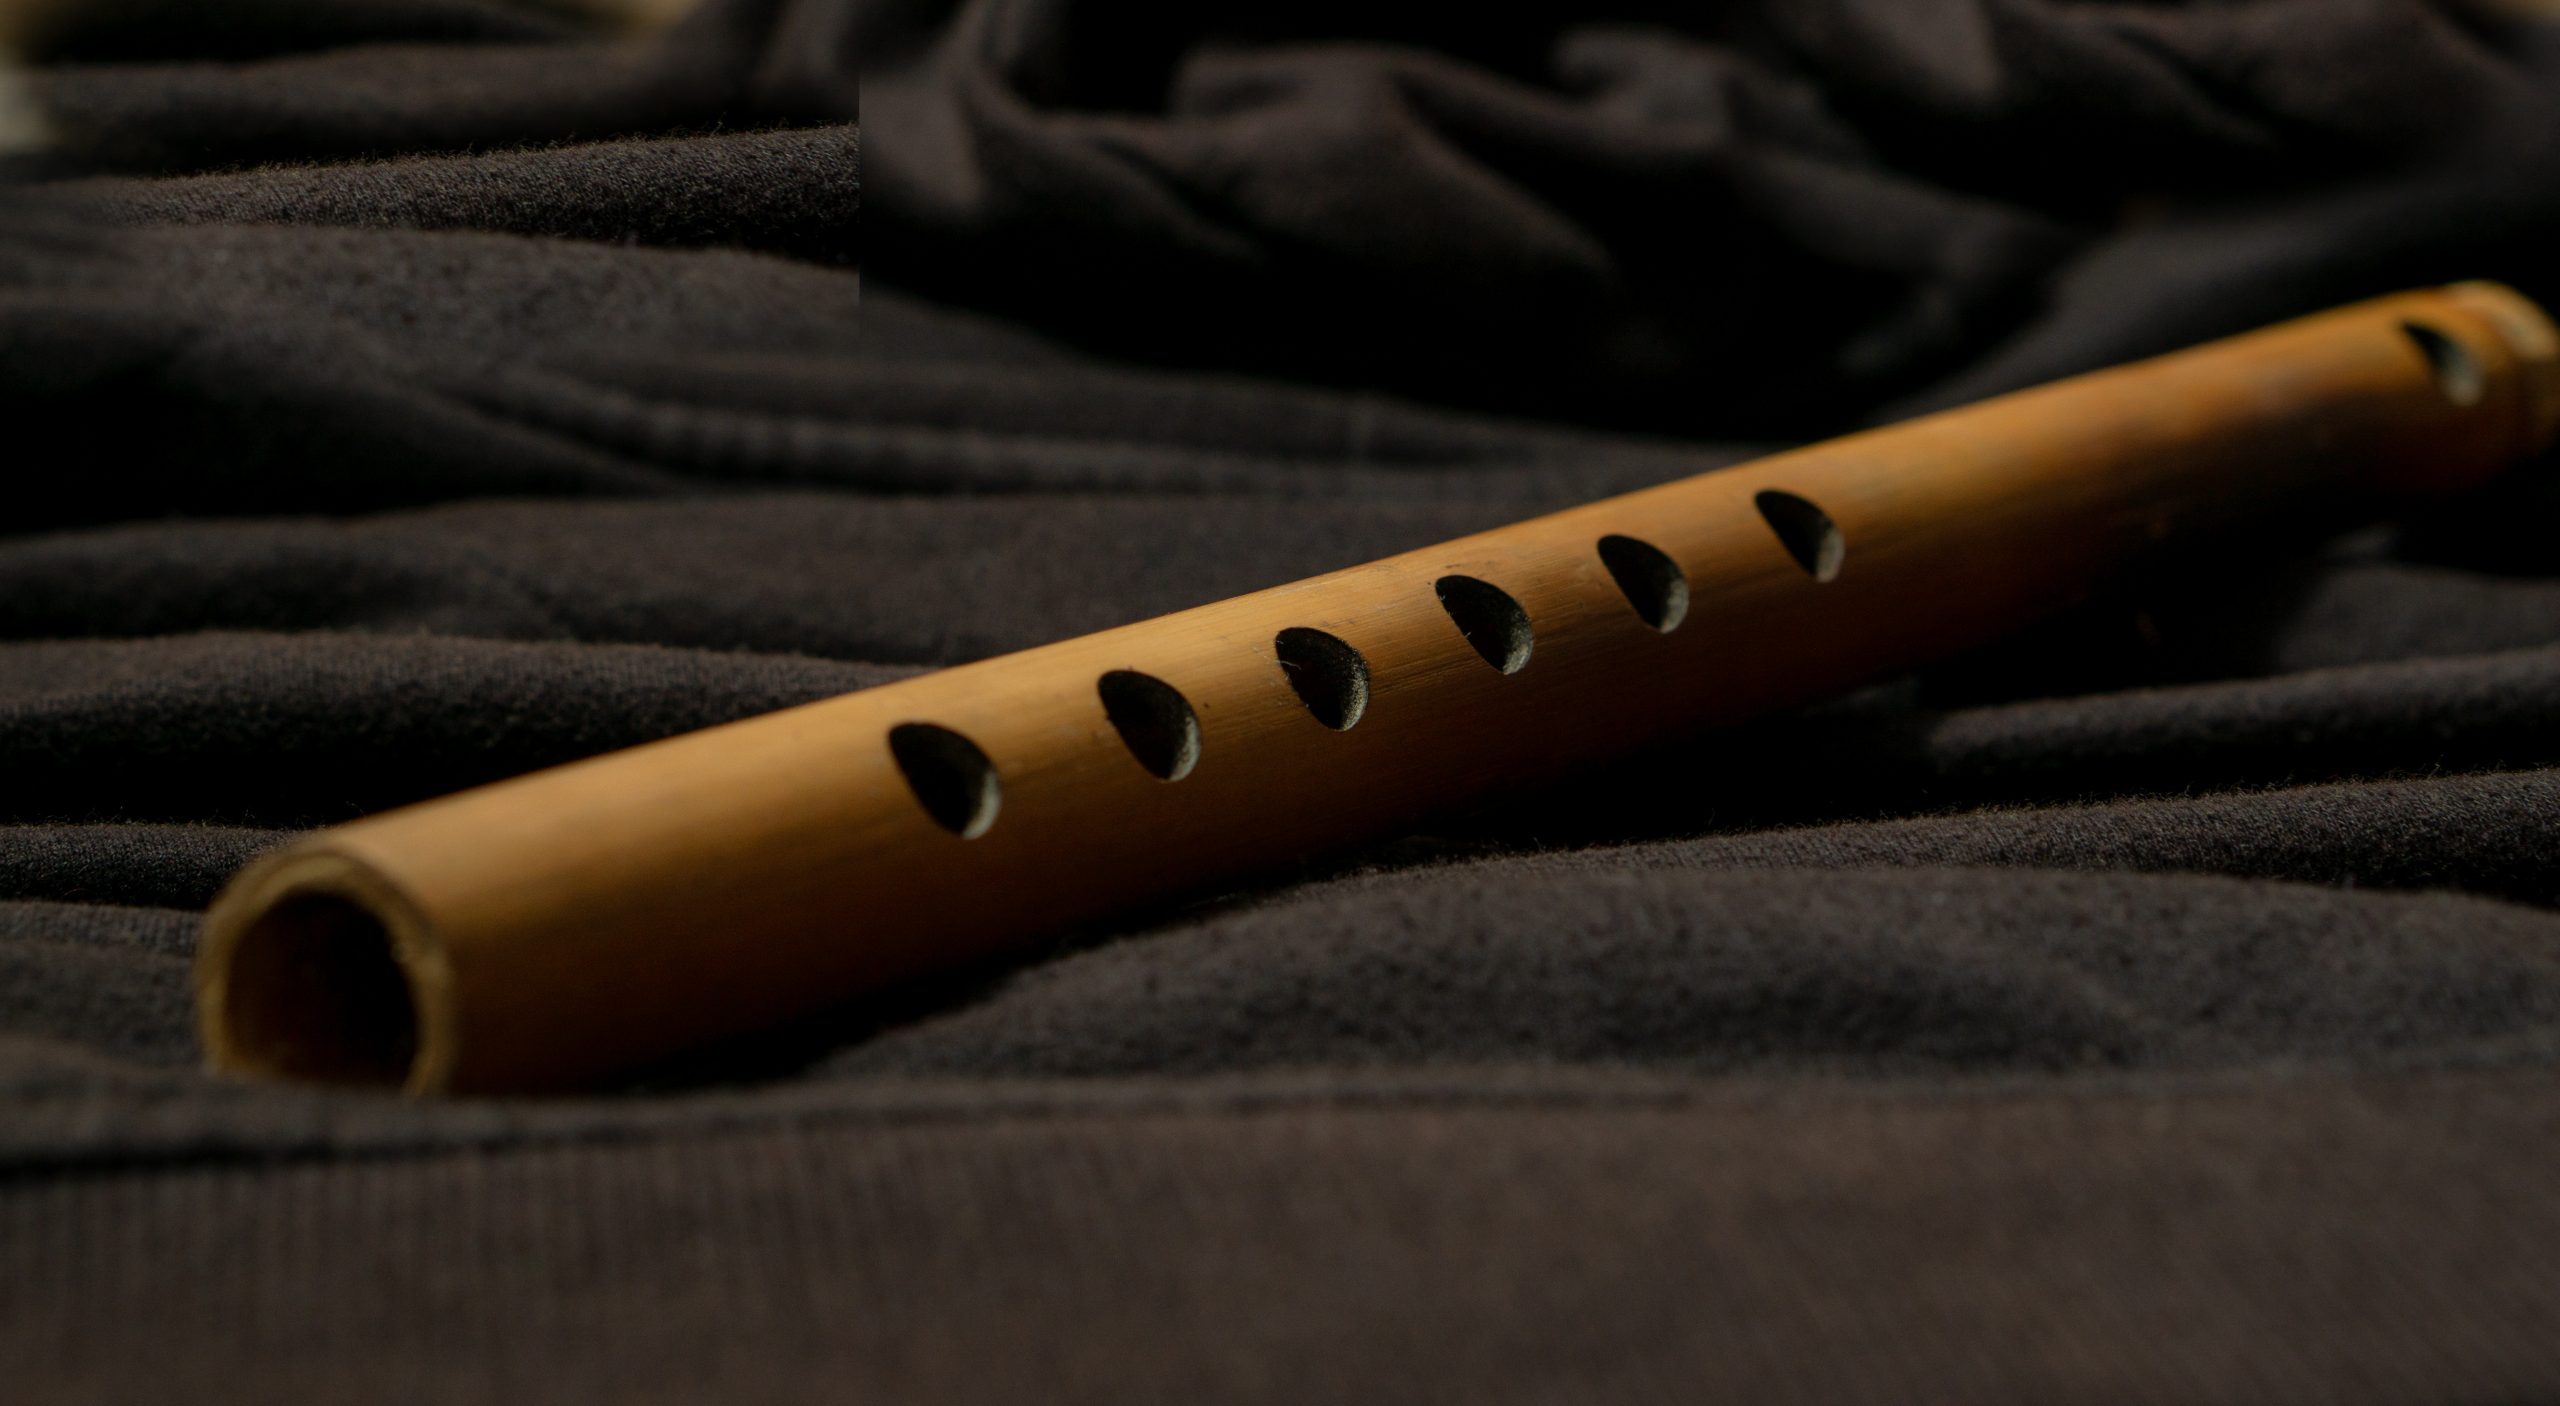 Bamboo flute on a black background